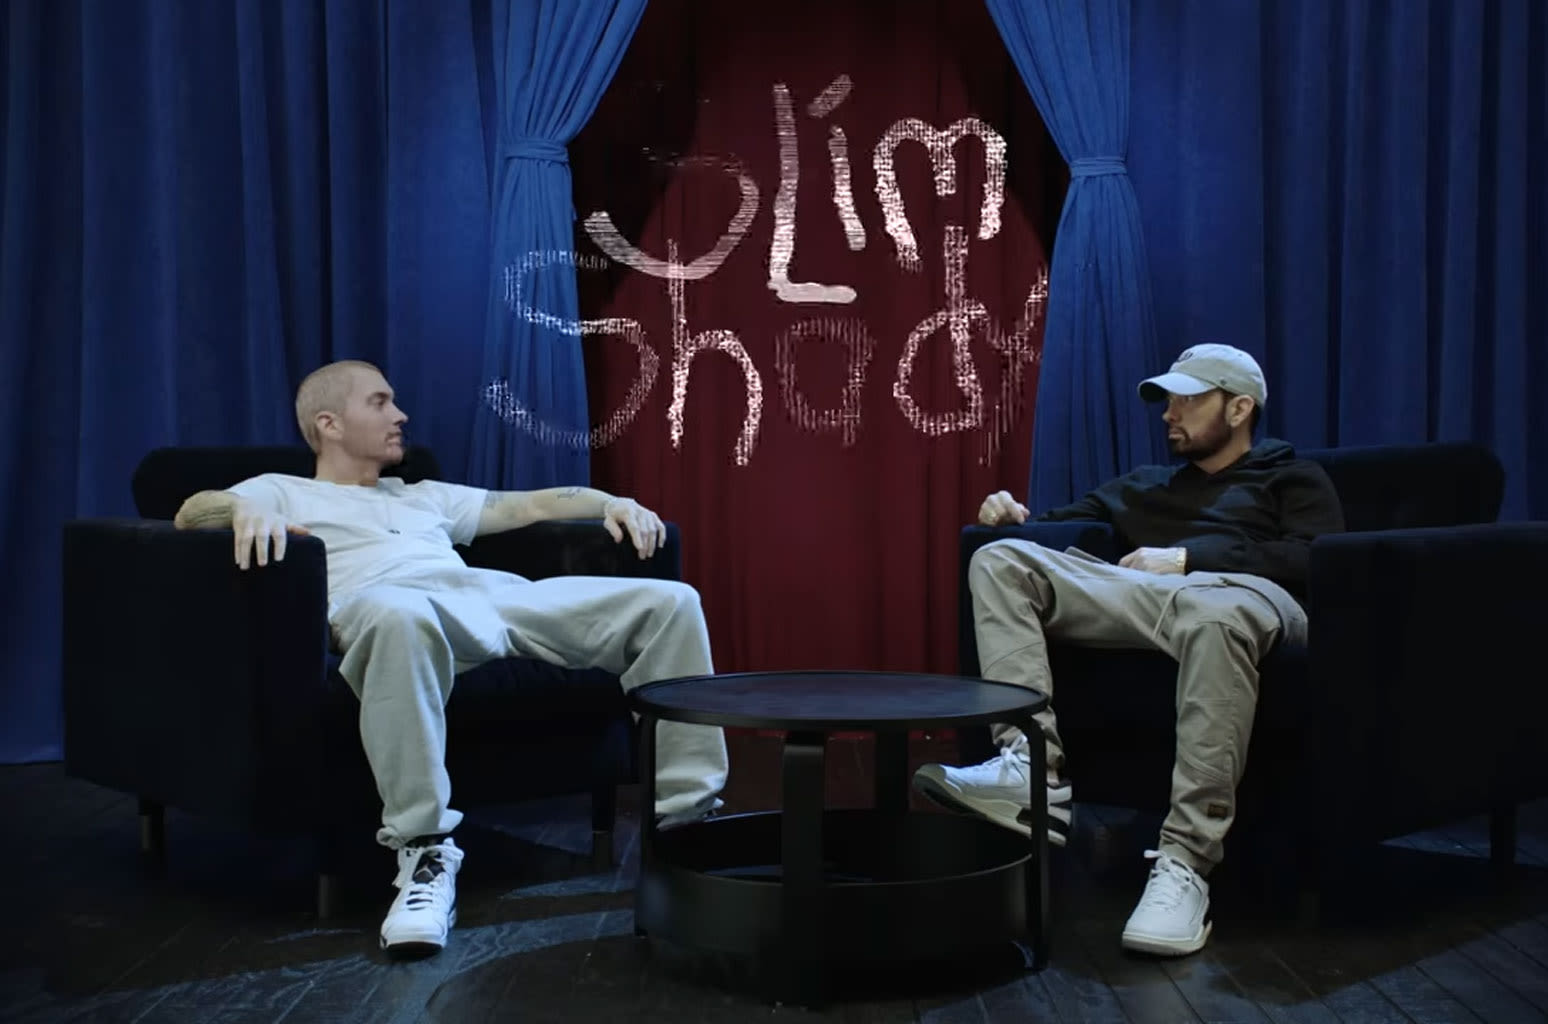 Watch Eminem Face Off in Conversation With His Slim Shady Alter-Ego